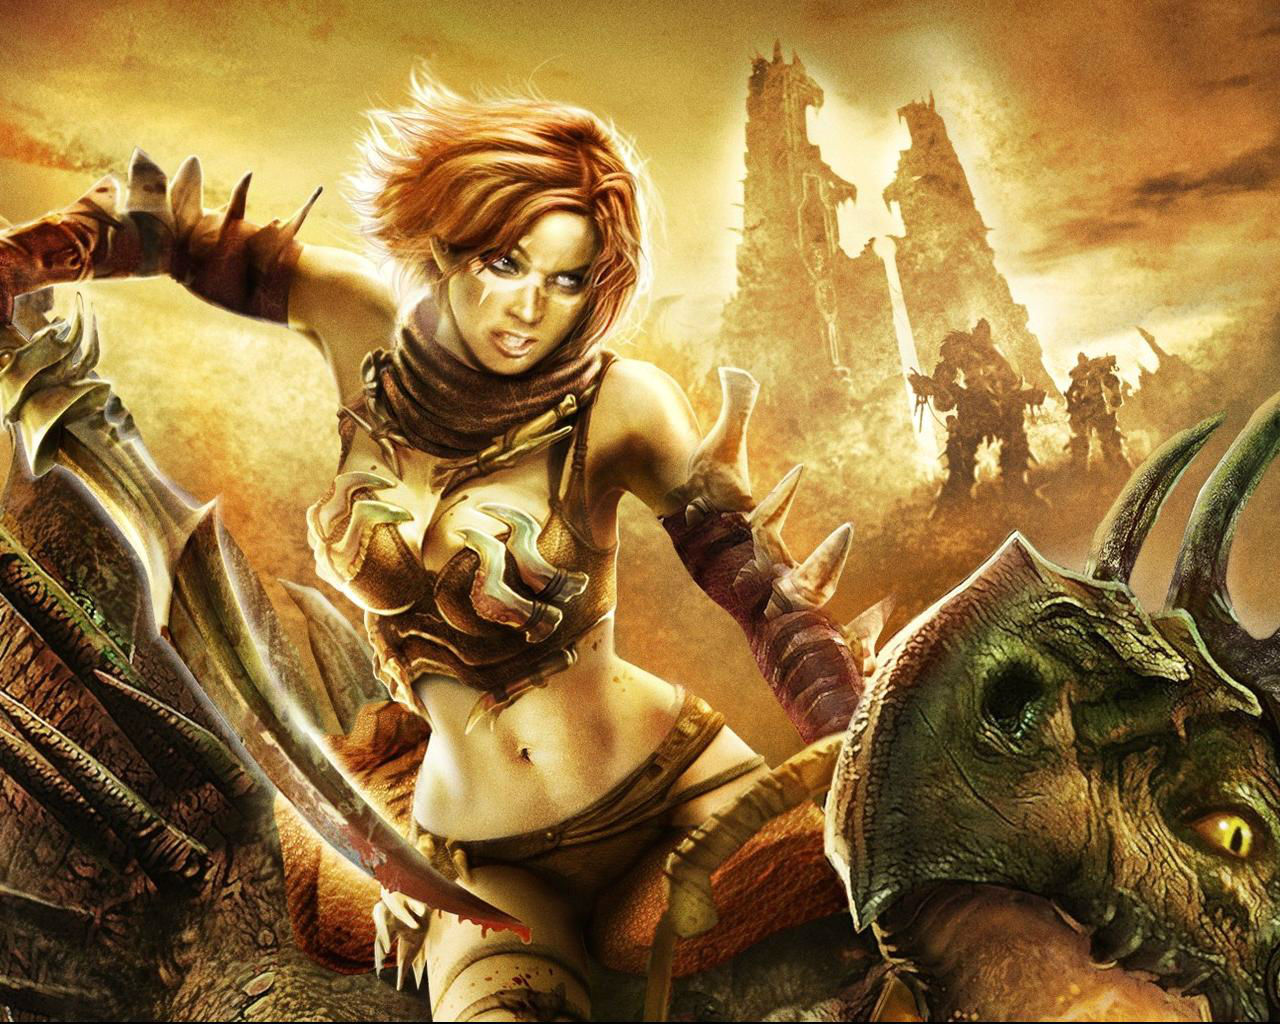 video game, tyris flare, woman warrior, golden axe High Definition image